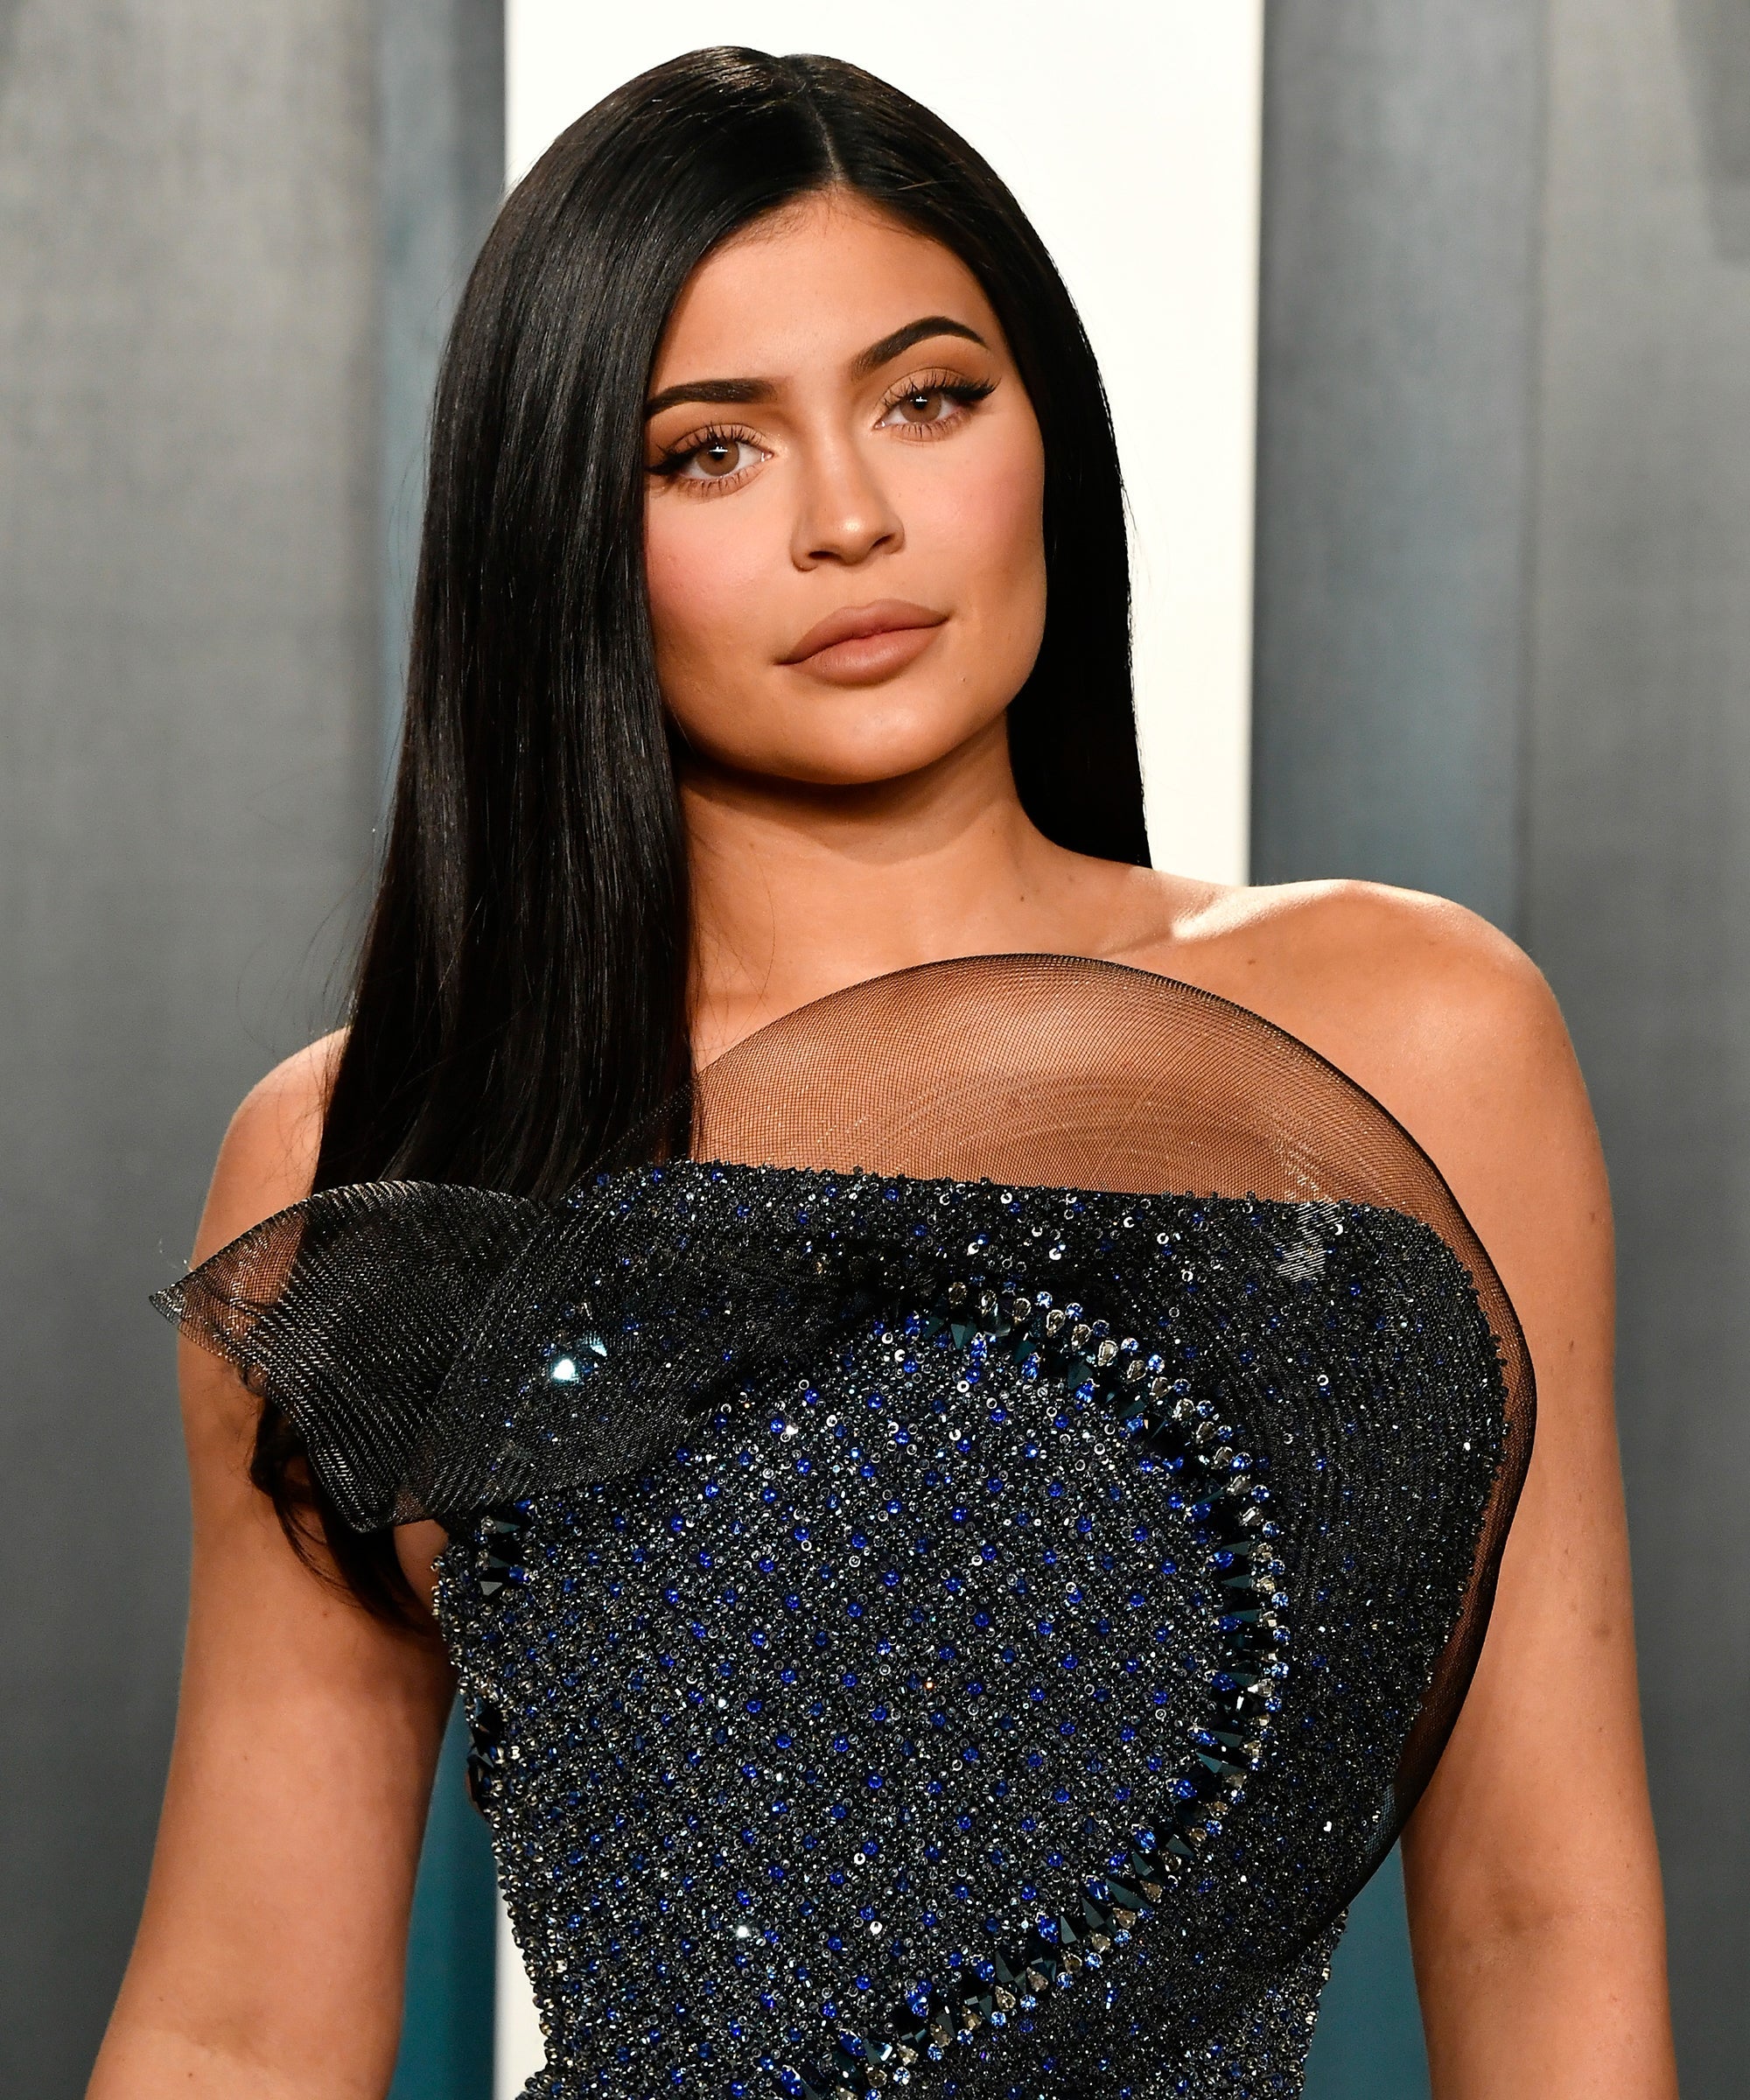 Kylie Jenner Hairstyles Hair Cuts and Colors